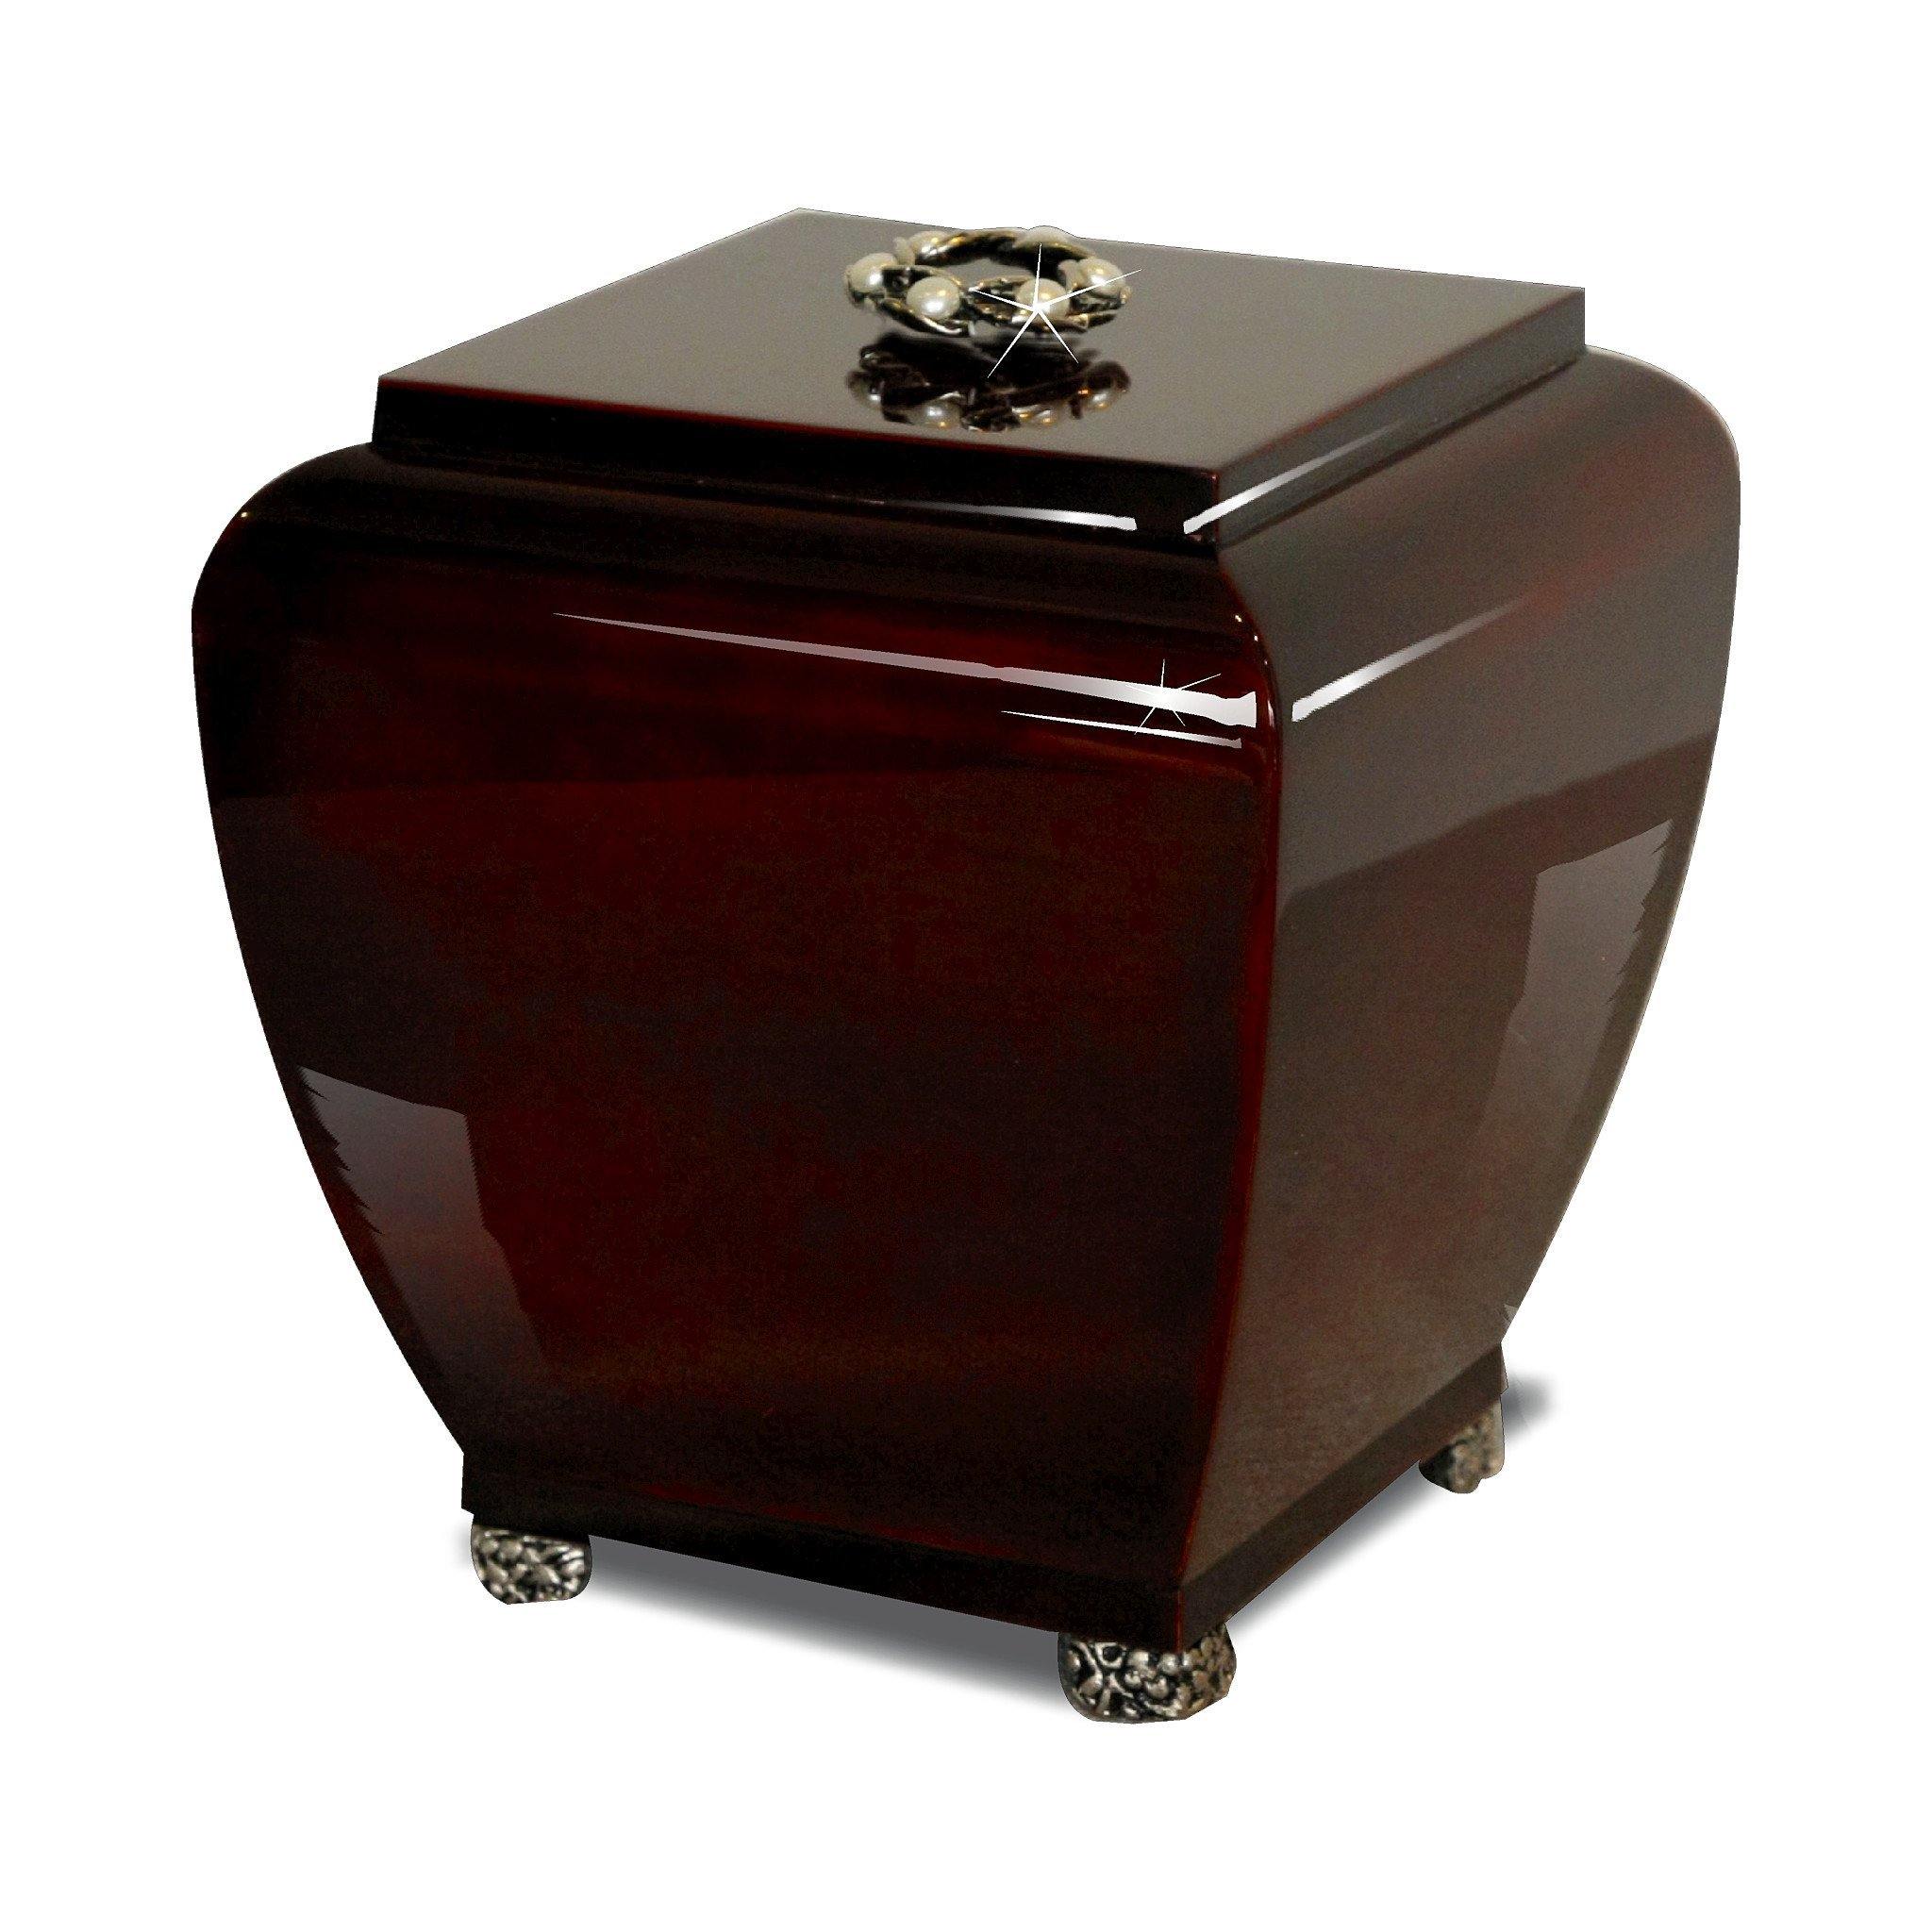 Wooden Urn - Beaminster Imperial Wreath Mahogany BEA